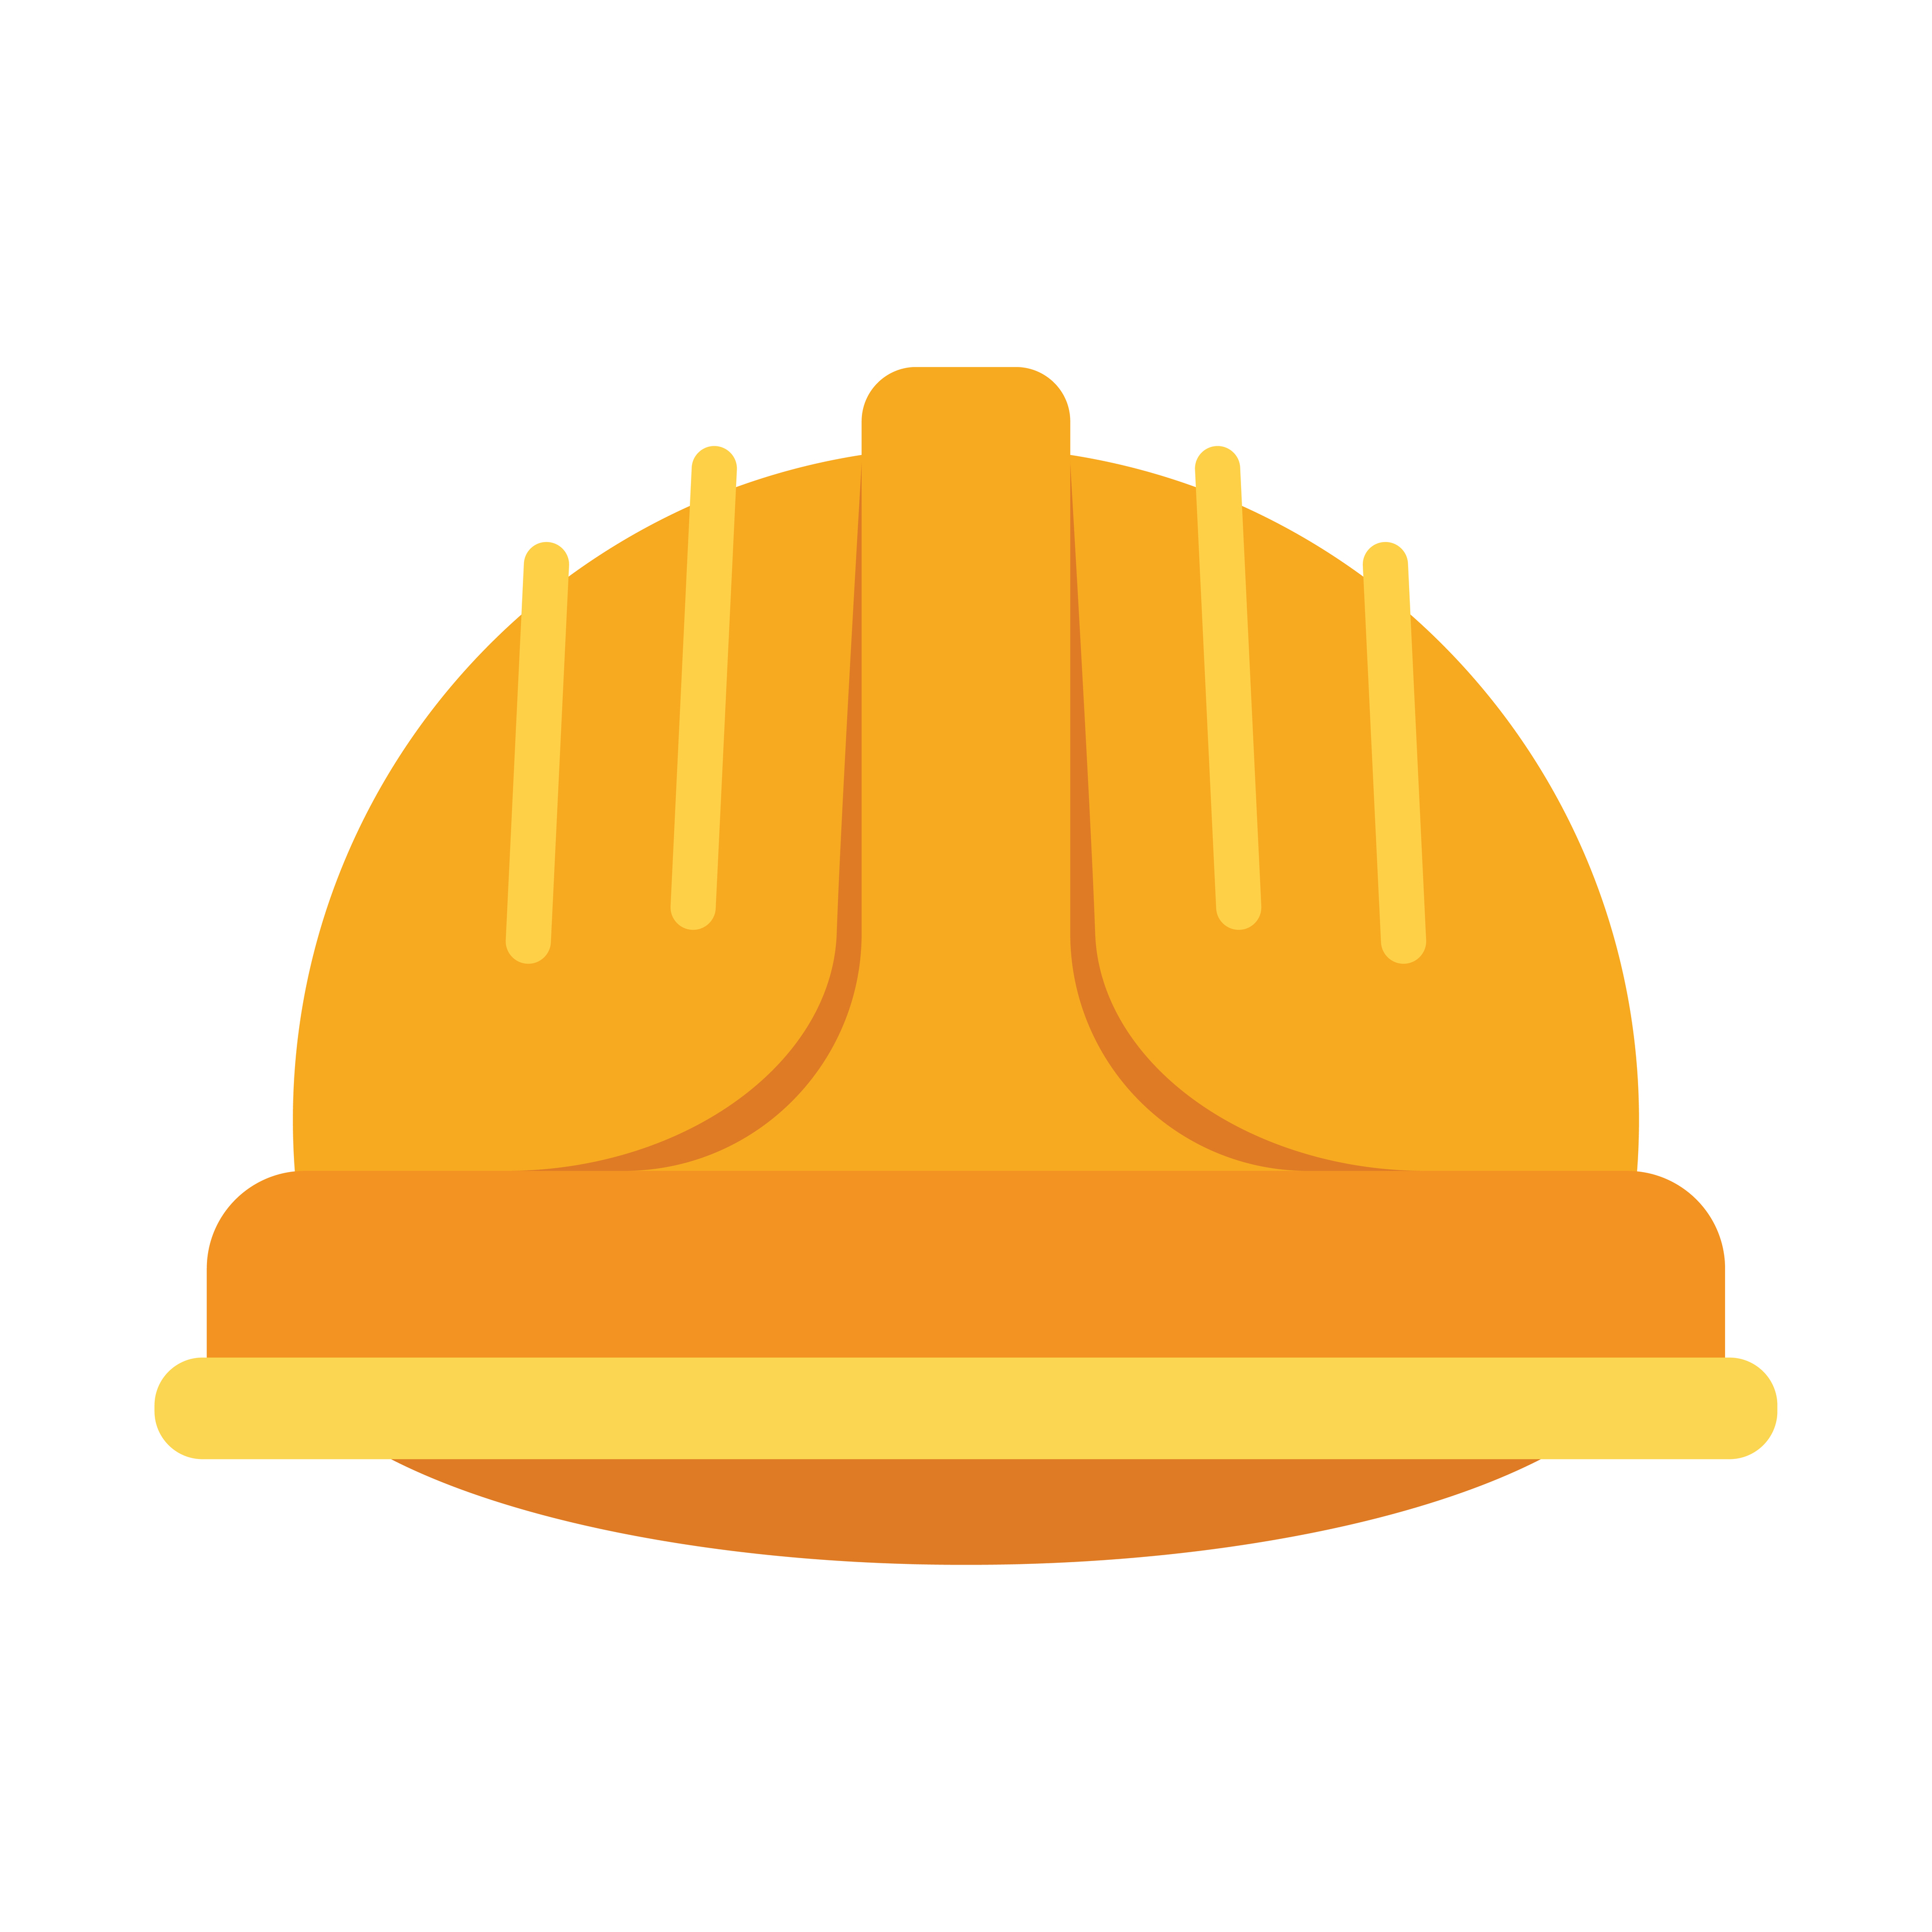 Engineer Helmet Vector Art Icons And Graphics For Free Download